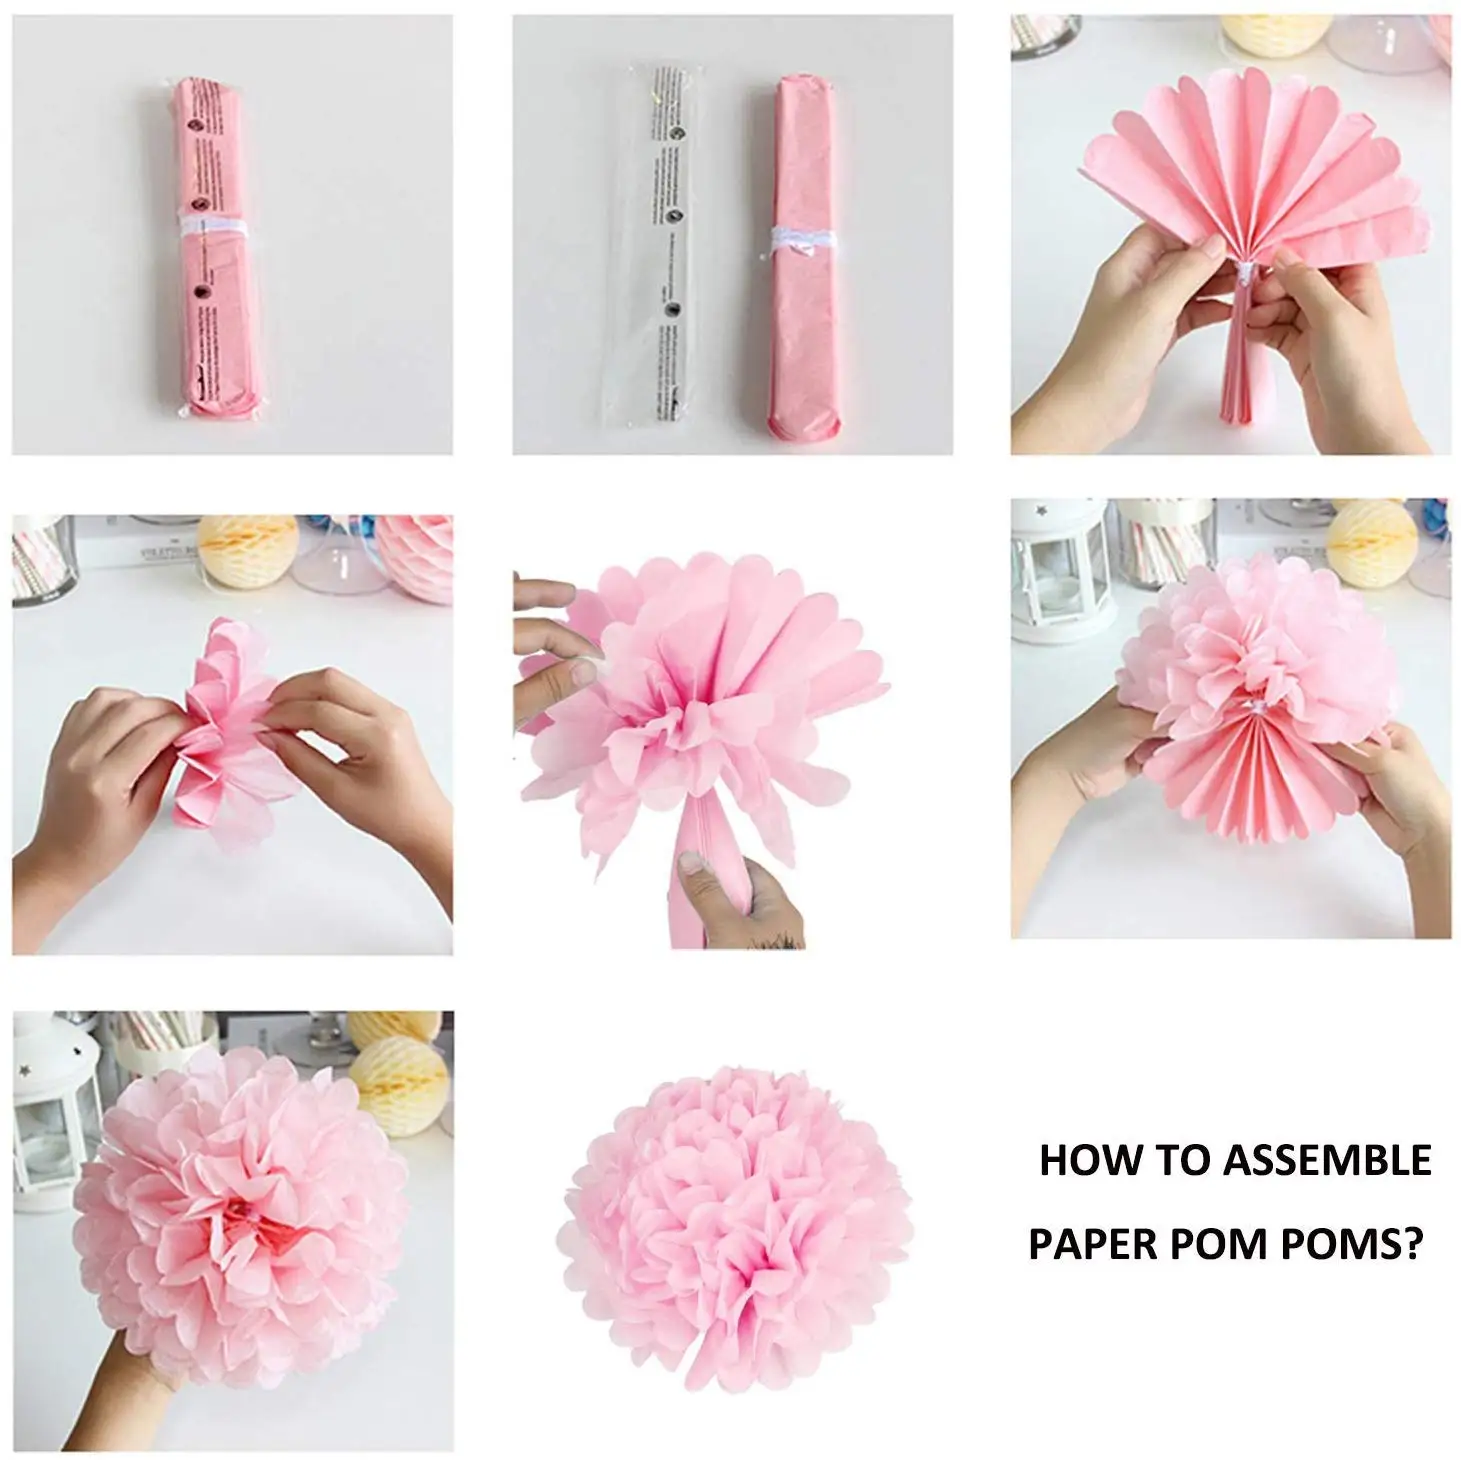 Wholesale 12 Inch Hanging Flower Decorations Tissue Paper Poms - Buy Tissue Paper Pom Poms,Paper Pom Poms,Paper Flower Product on Alibaba.com